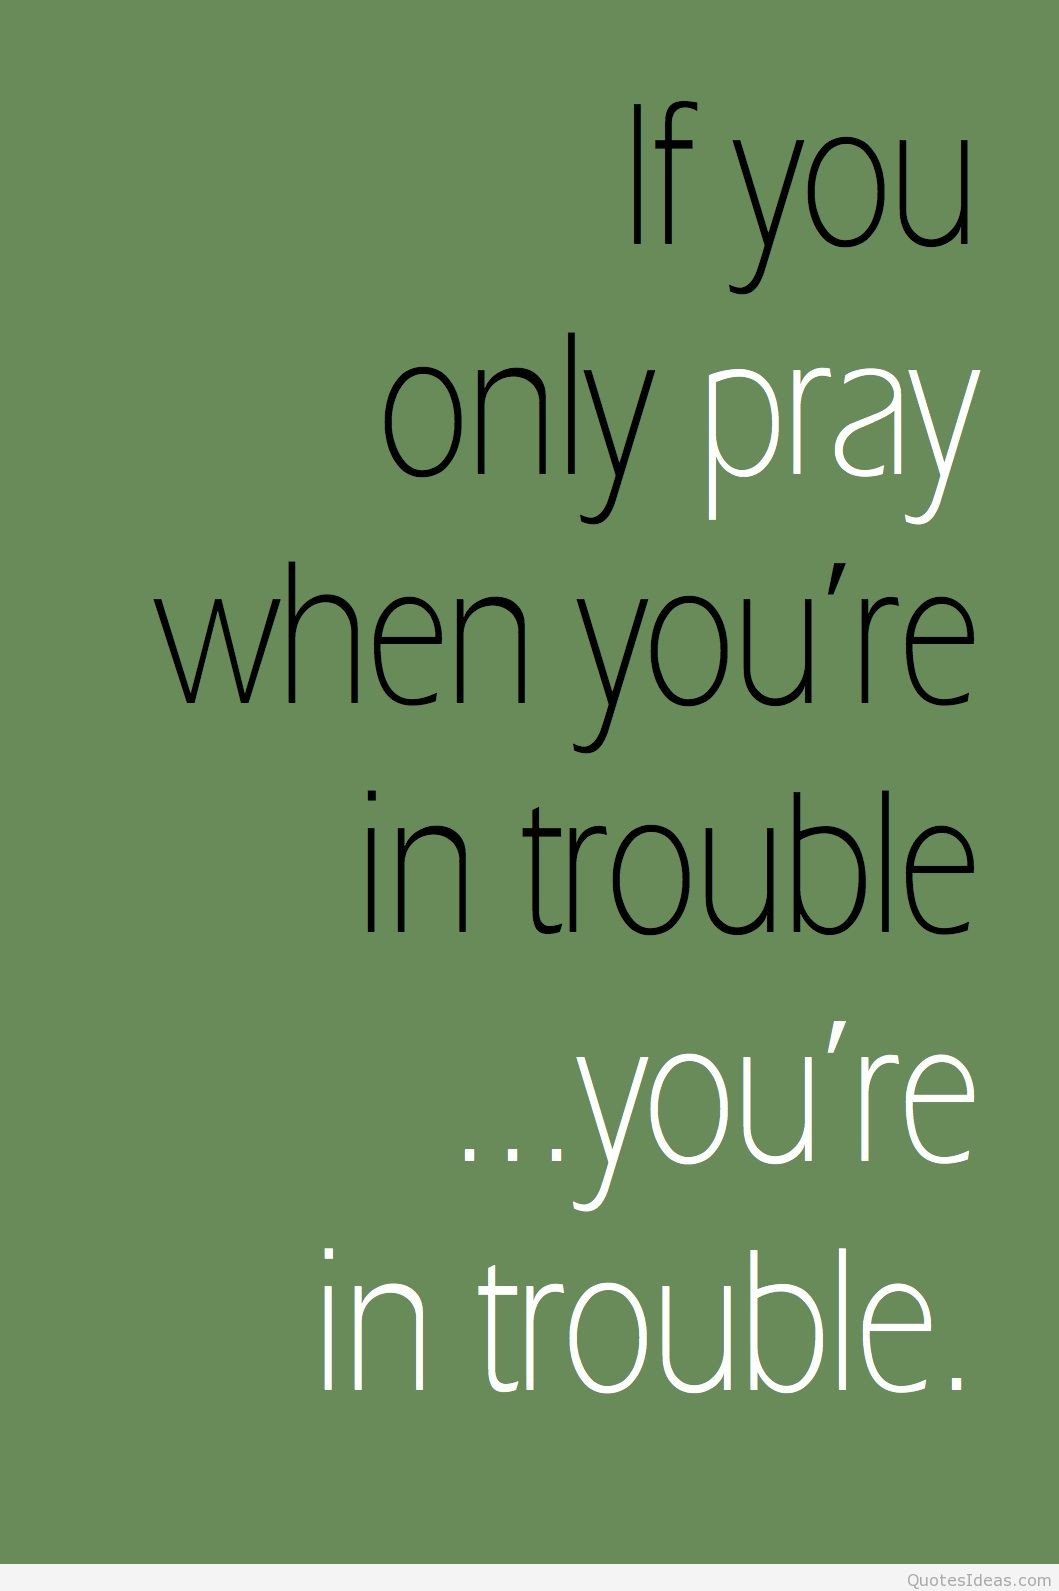 Funny Quotes And Images
 Top prayer quotes images sayings and wallpapers hd